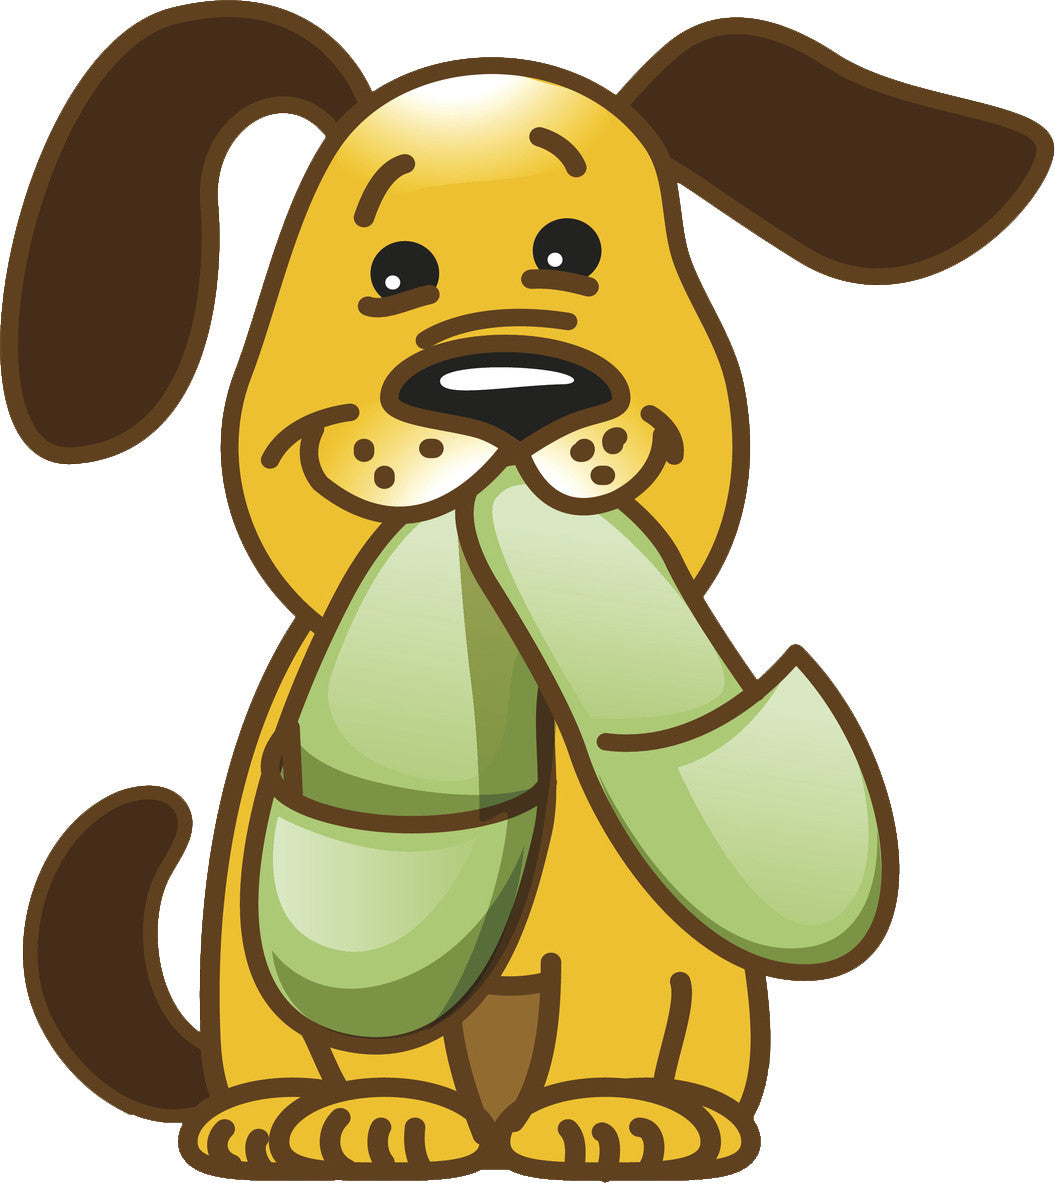 Adorable Cute Puppy Dog with Slippers Vinyl Sticke Shinobi Stickers